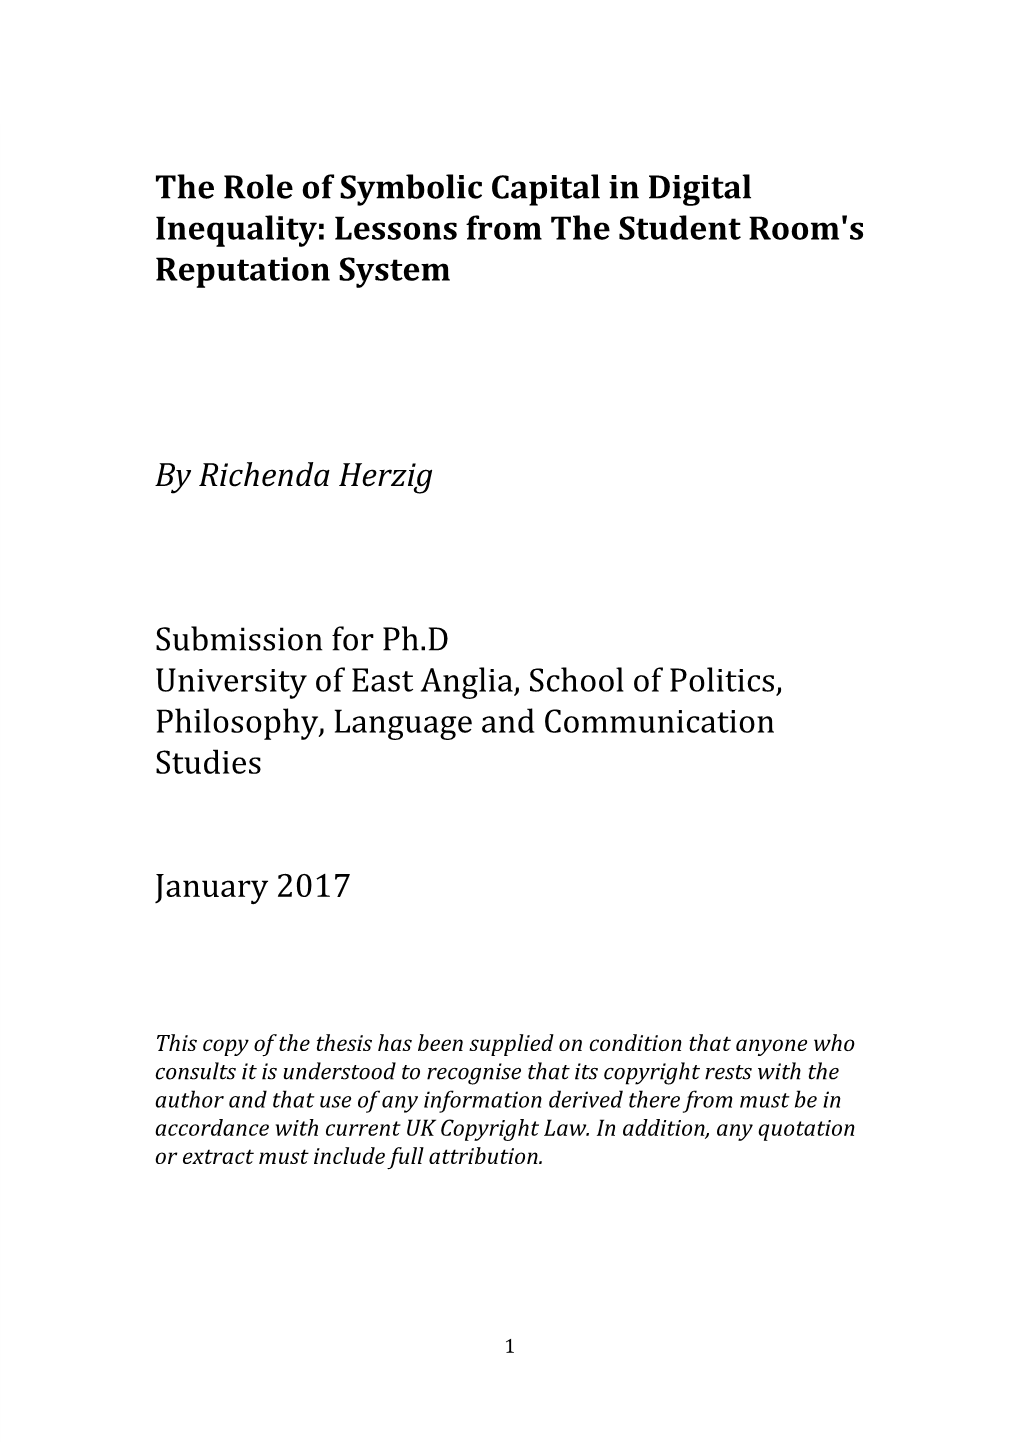 The Role of Symbolic Capital in Digital Inequality: Lessons from the Student Room's Reputation System